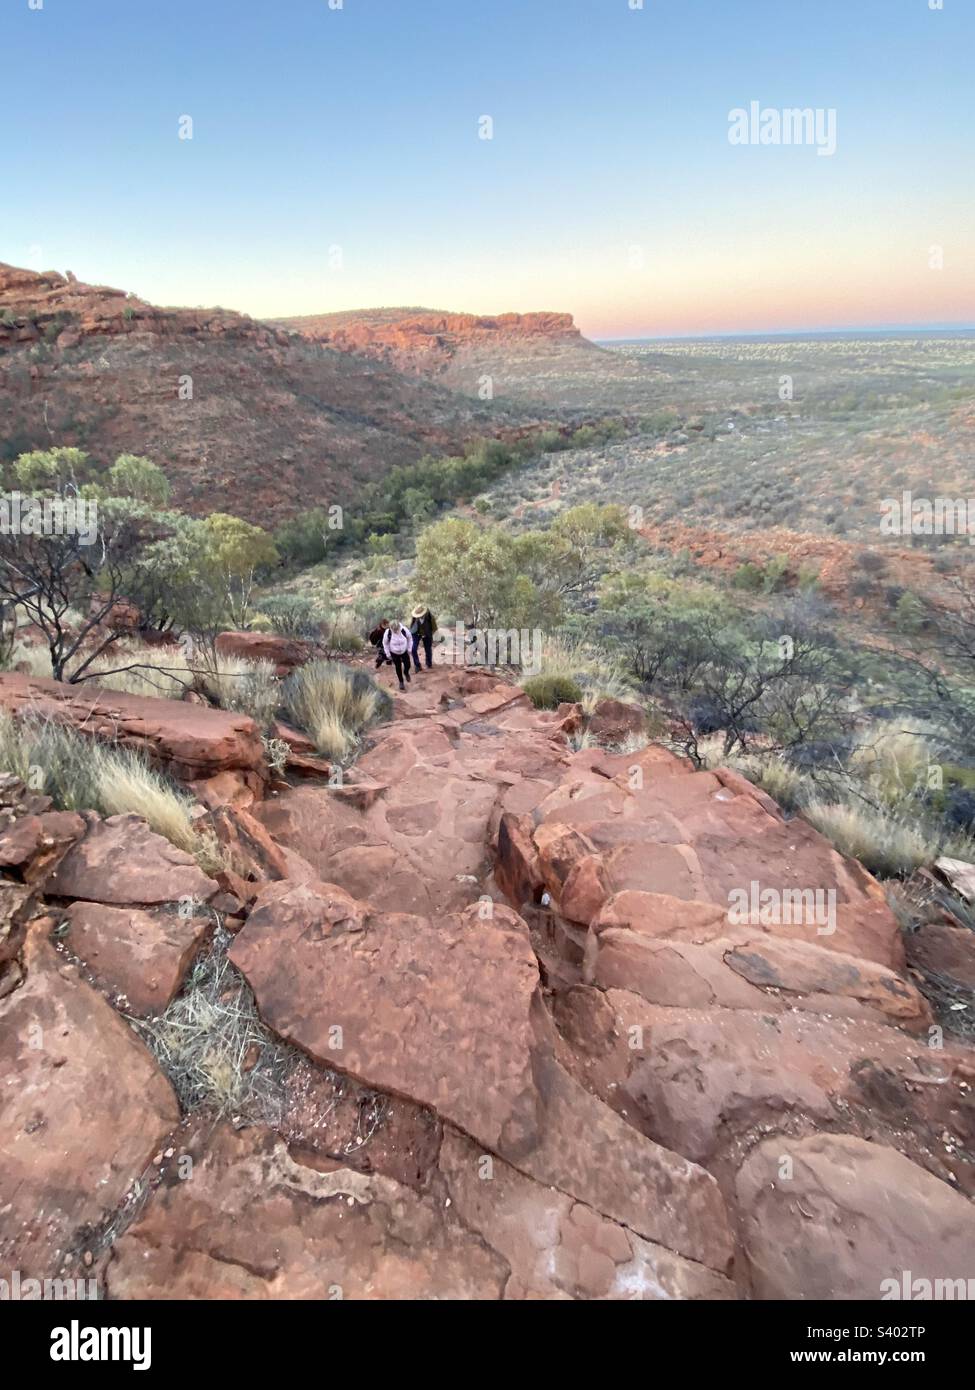 Hikers making early dawn start on the rim walk at Kings Canyon, NT, Australia. Hiking in remote wildness outback scenery in Northern Territory Stock Photo